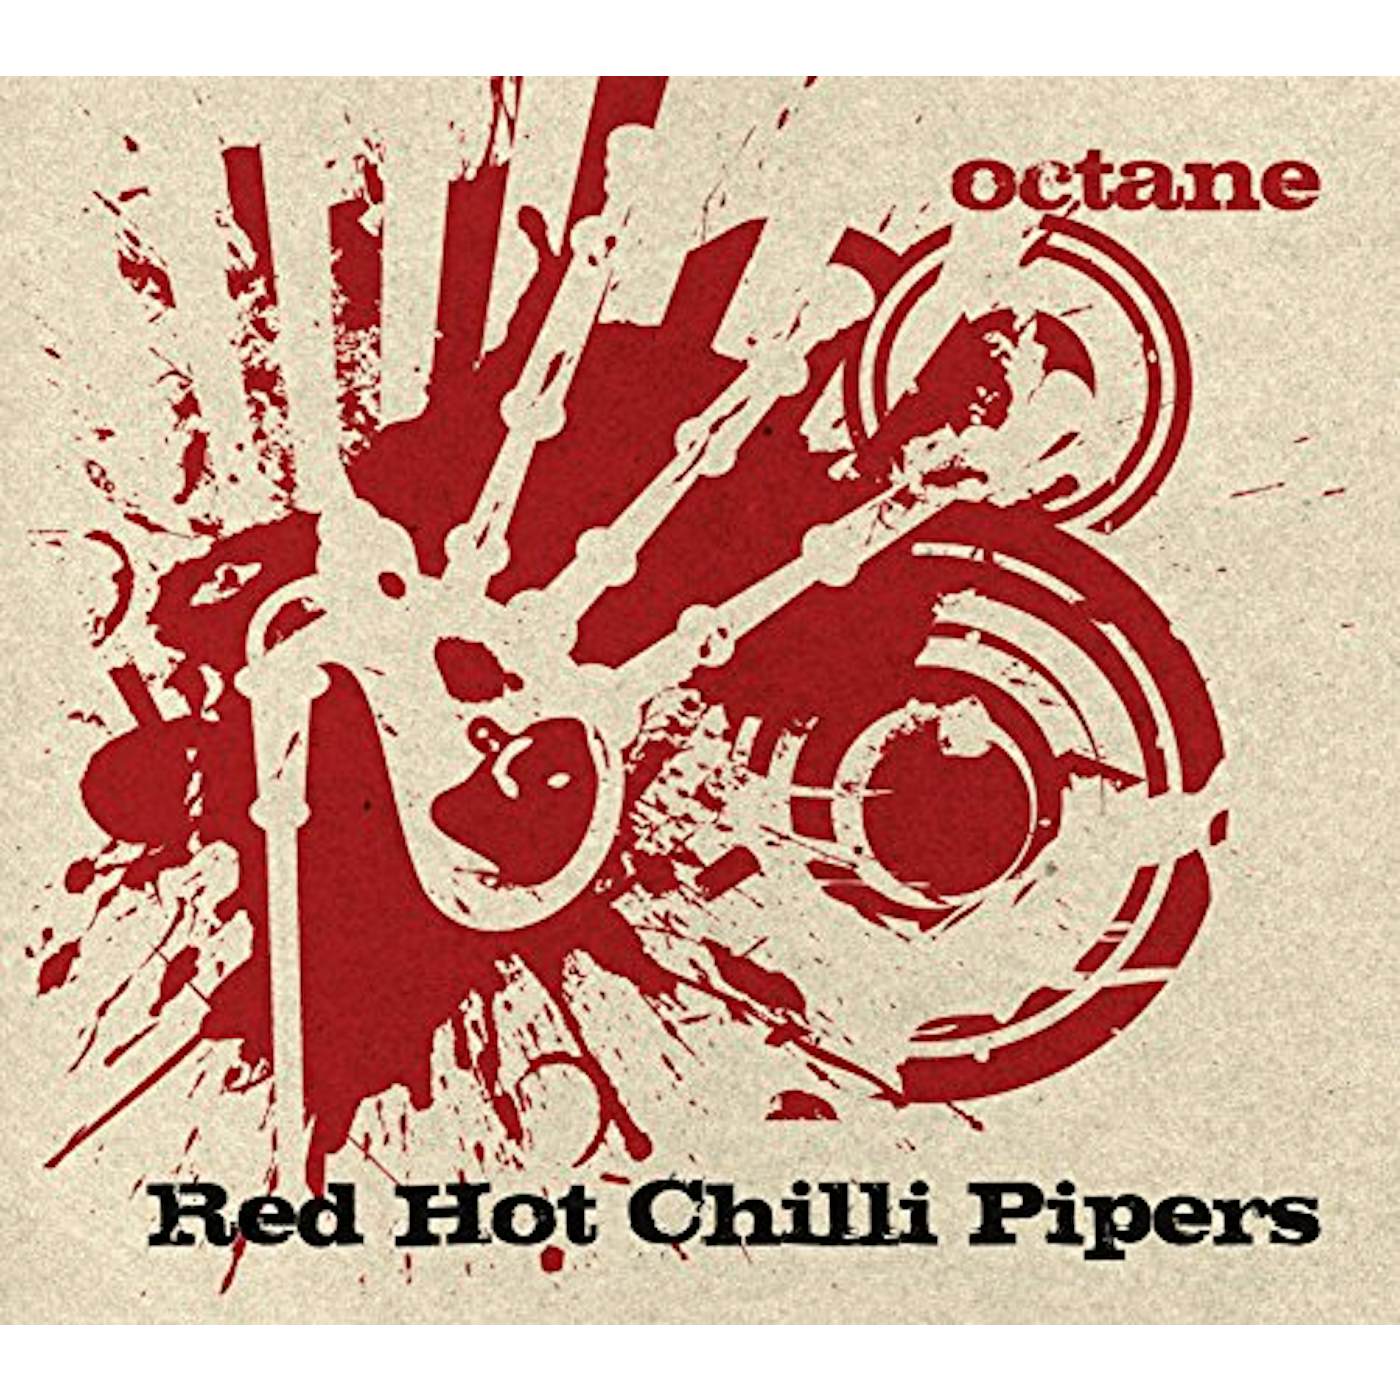 Red Hot Chilli Pipers OCTANE CD